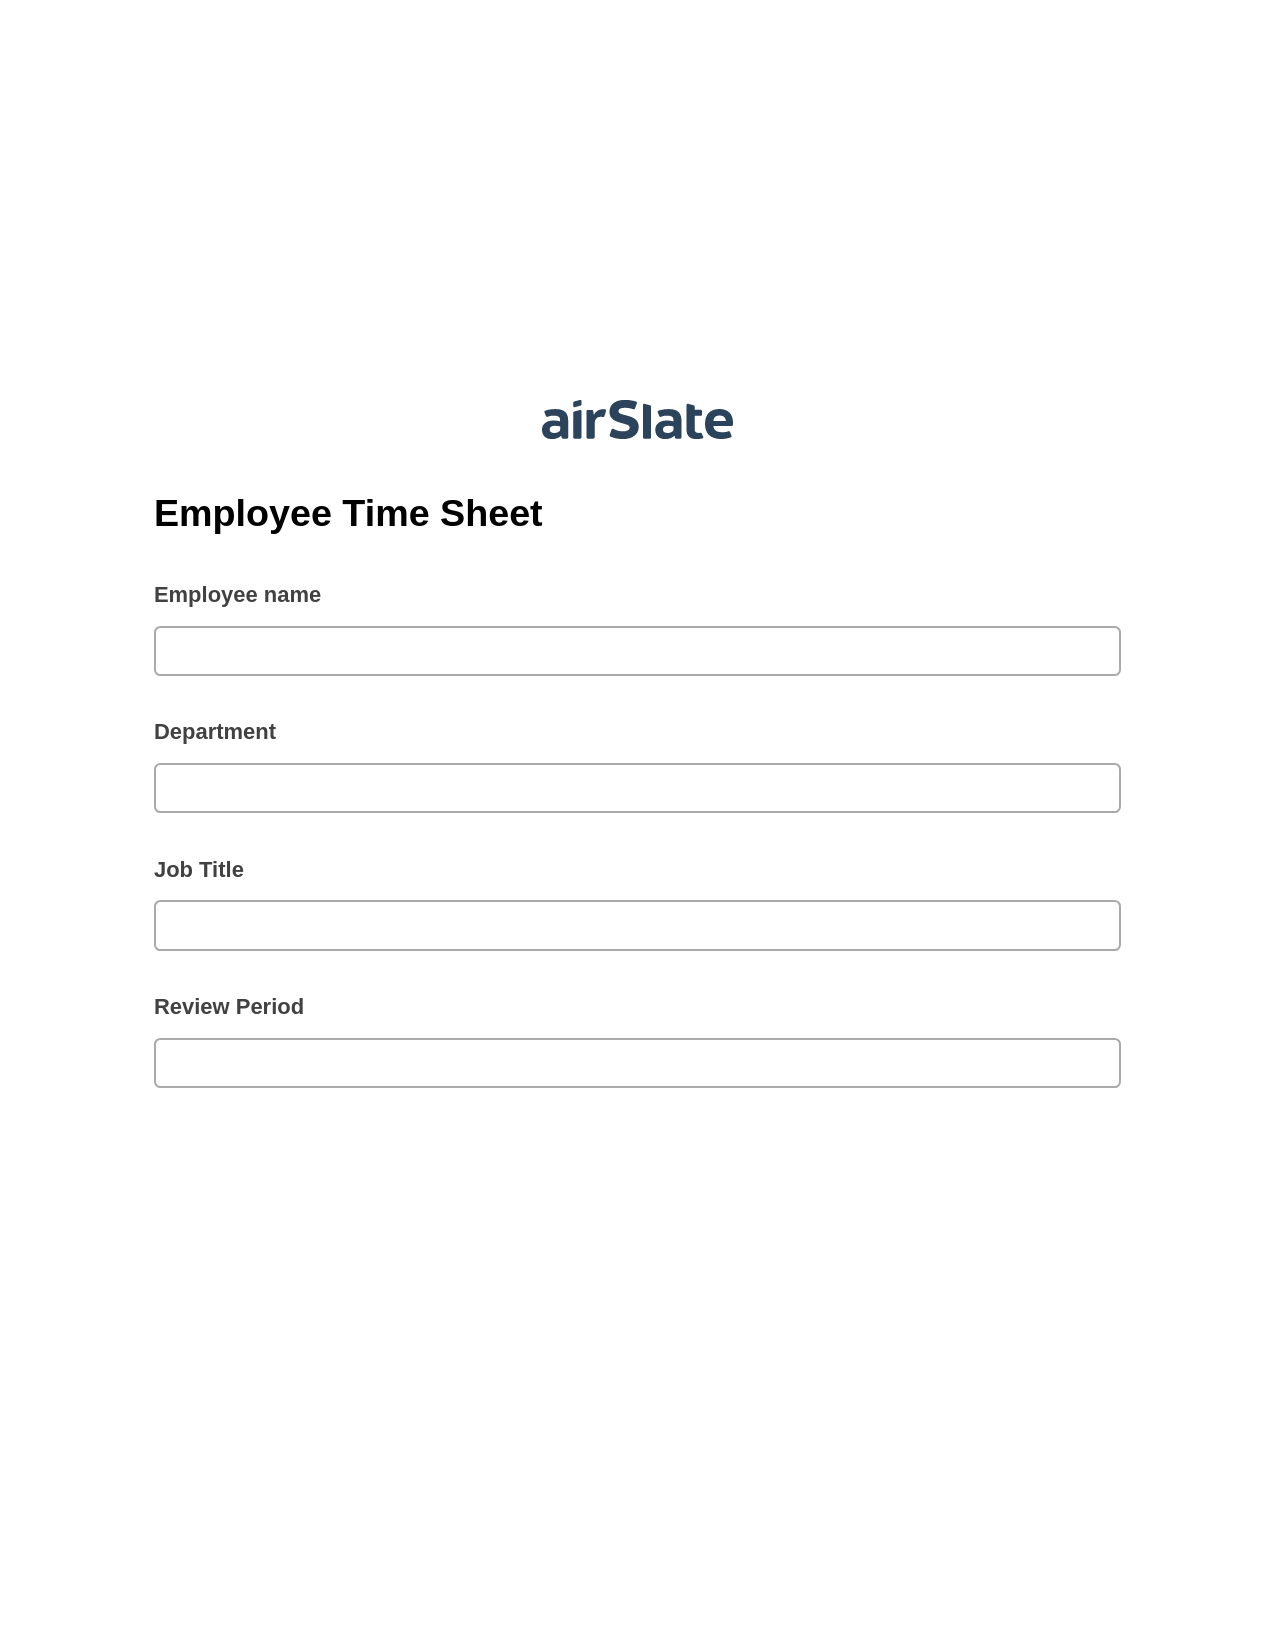 Multirole Employee Time Sheet Pre-fill from CSV File Bot, Update Audit Trail Bot, Archive to SharePoint Folder Bot